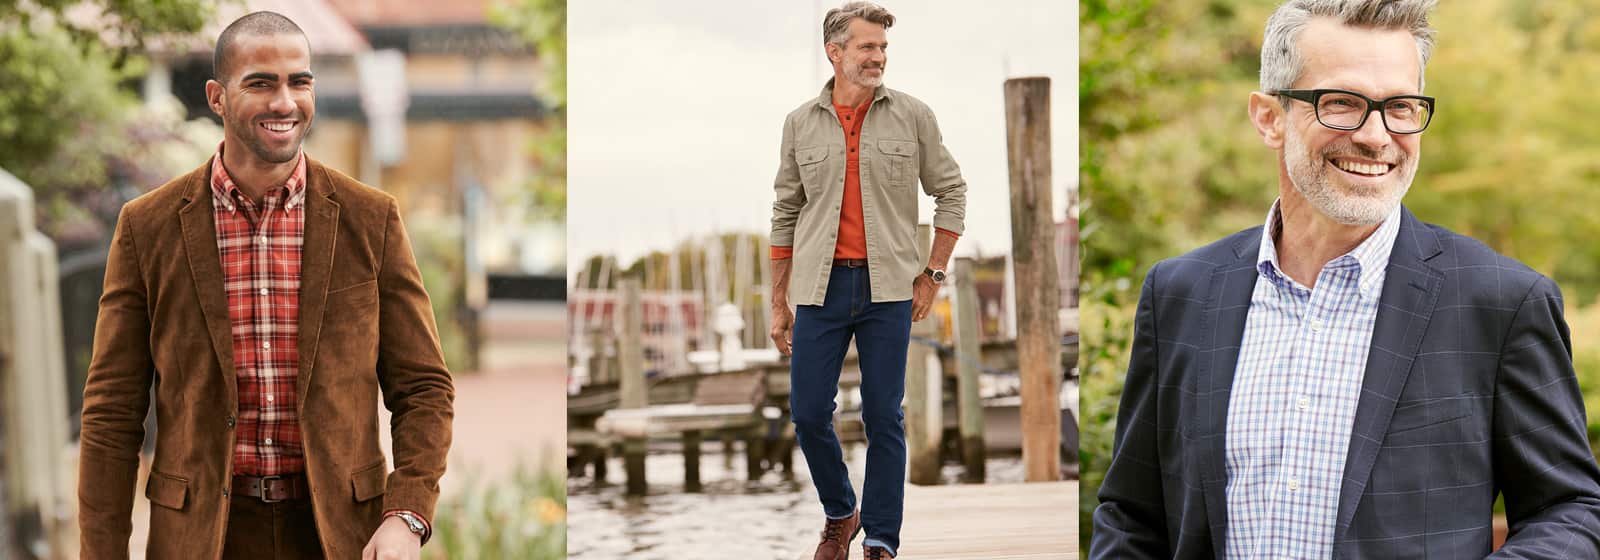 How to build a capsule wardrobe for guys | Lands' End